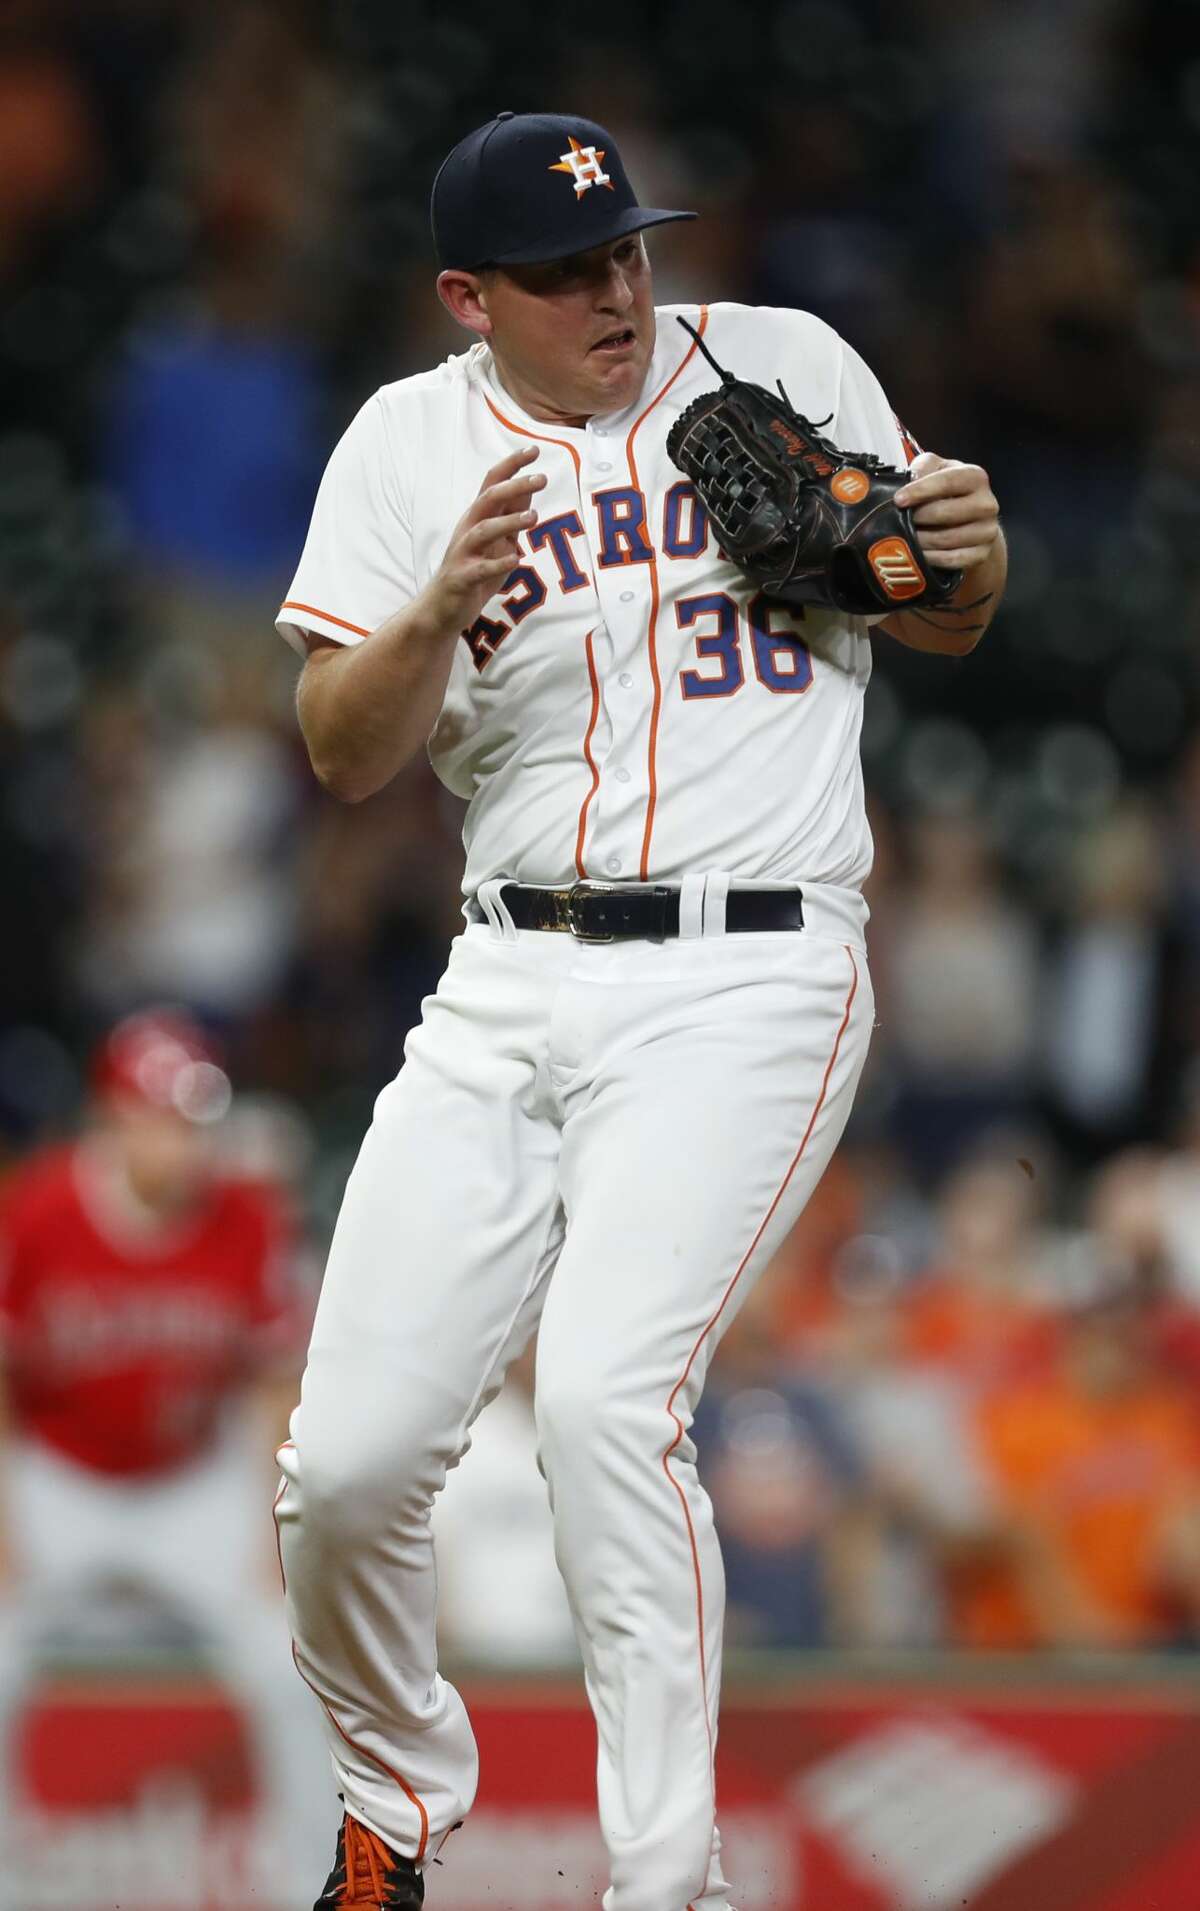 Houston Astros relief pitcher Will Harris (36) catches Los Angeles Angels Andrelton Simmons' sharply hit line drive for the final out of an MLB baseball game at Minute Maid Park, Wednesday, April 19, 2017, in Houston. ( Karen Warren / Houston Chronicle )